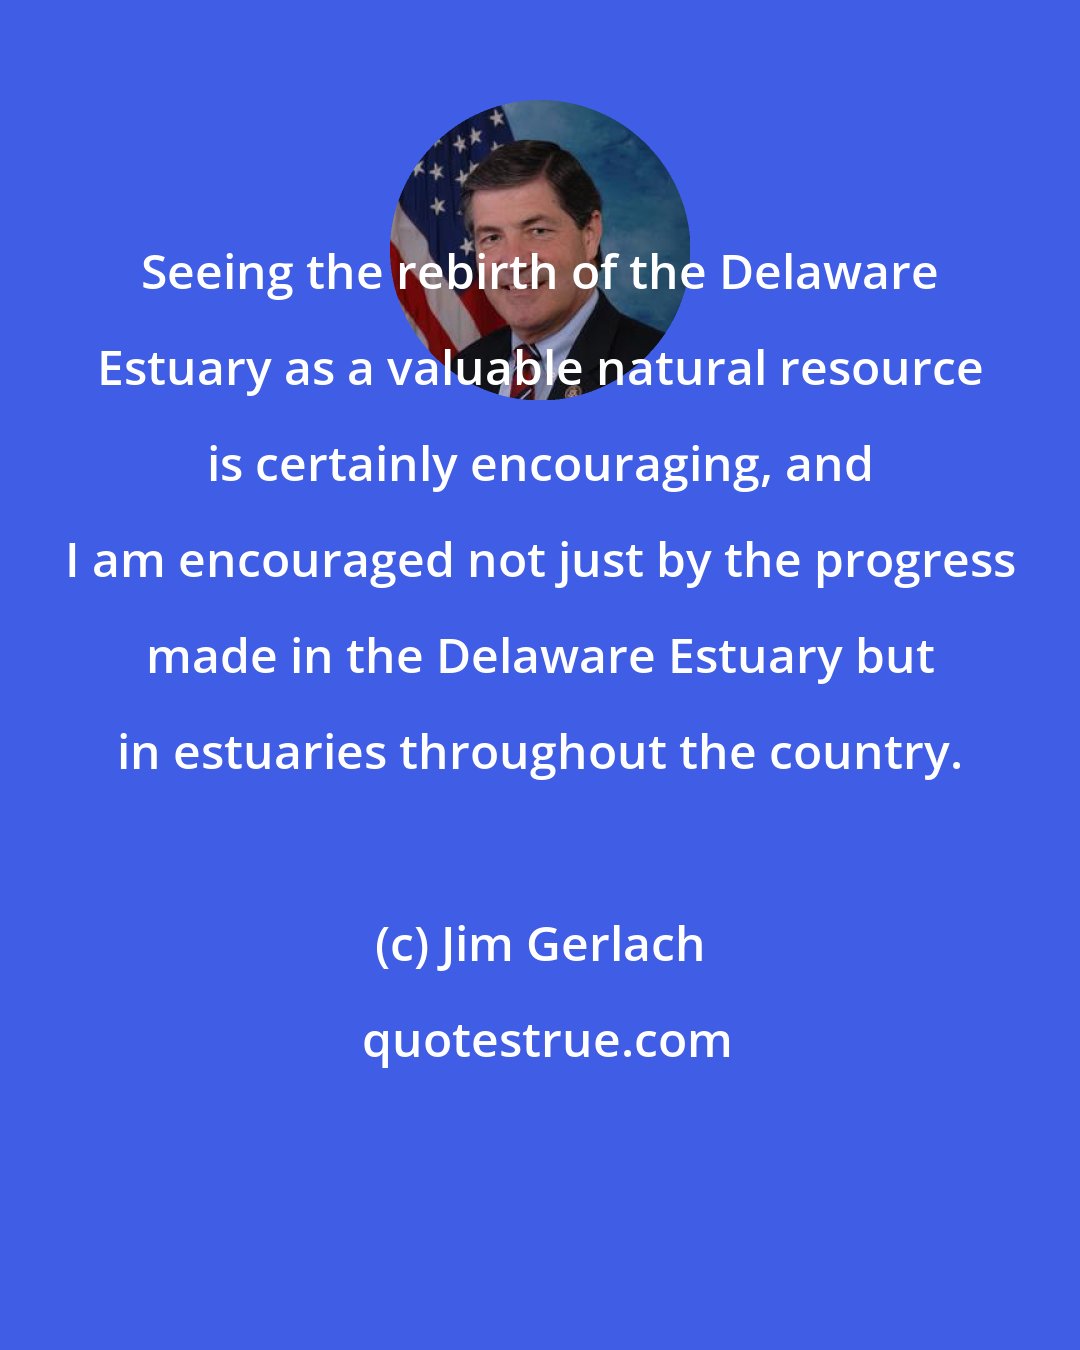 Jim Gerlach: Seeing the rebirth of the Delaware Estuary as a valuable natural resource is certainly encouraging, and I am encouraged not just by the progress made in the Delaware Estuary but in estuaries throughout the country.